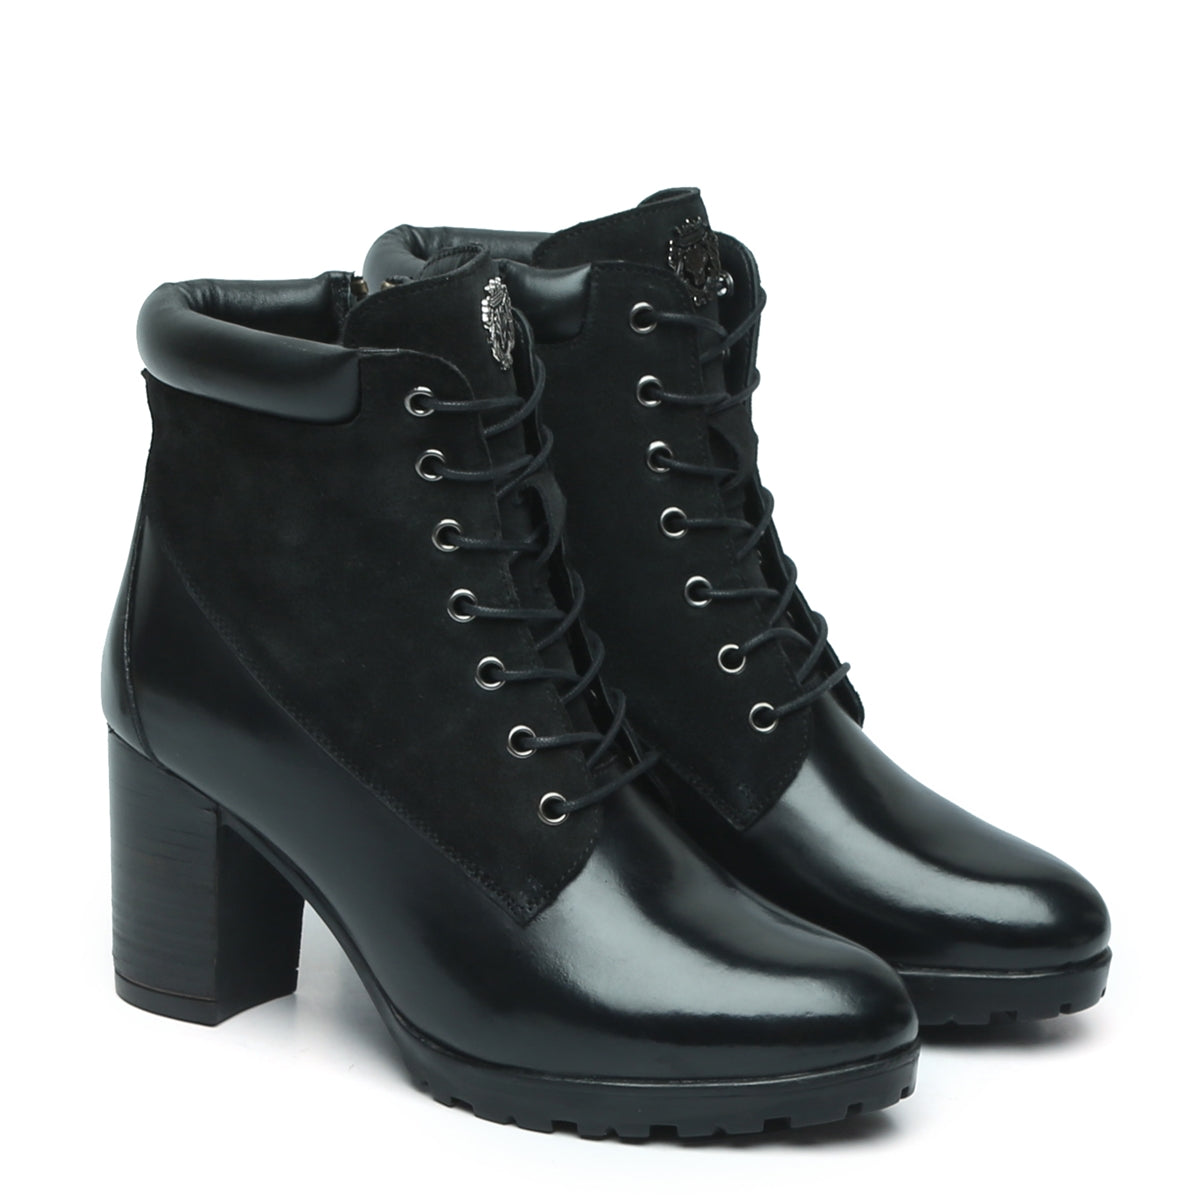 Black Suade Ultra Light-Weight Leather Boots For Women By Brune & Bareskin